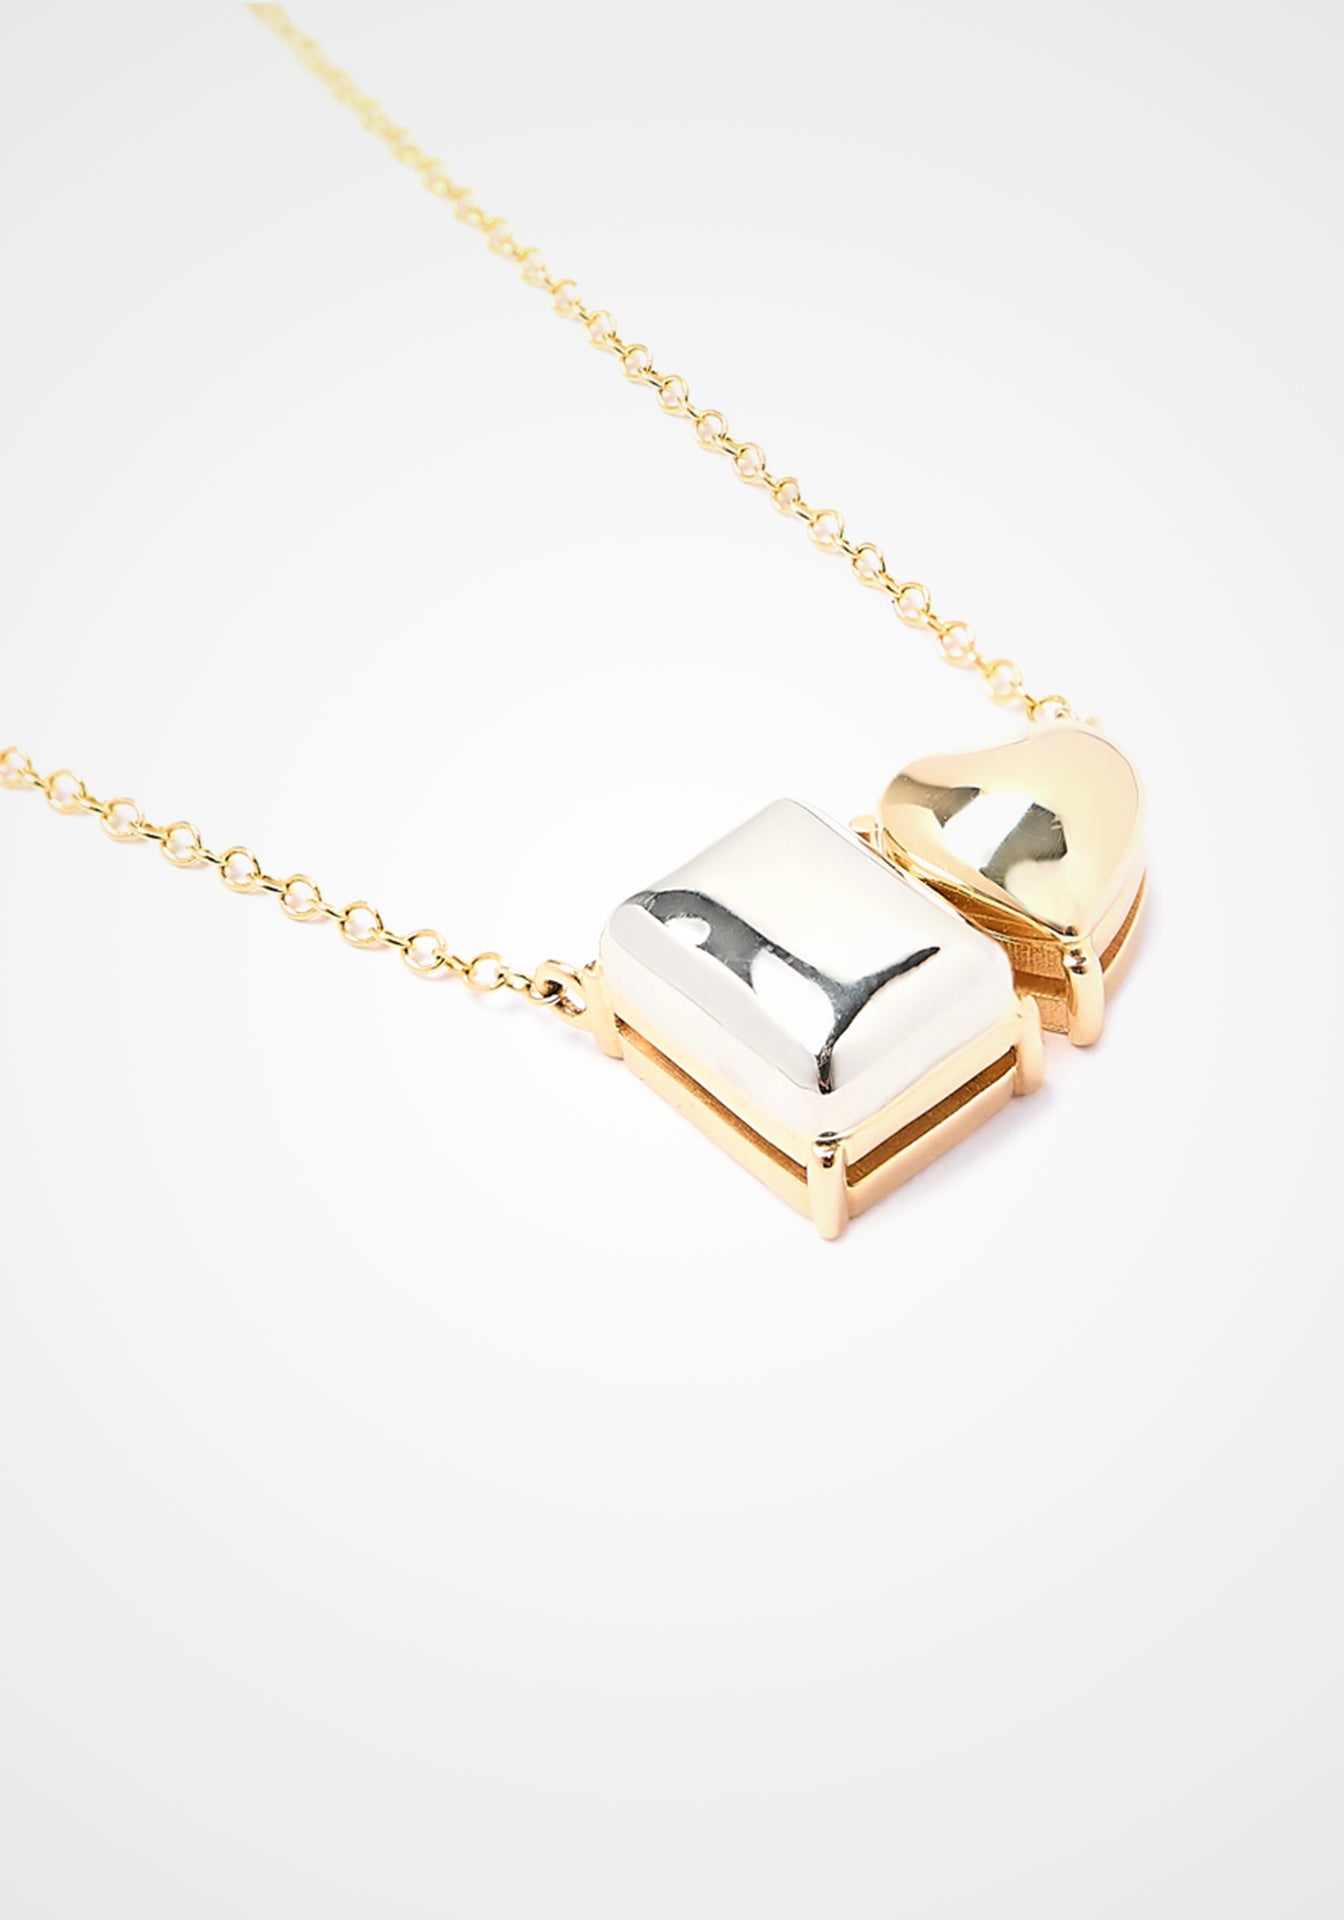 Stoned Toi Et Moi, 14K Yellow Gold Necklace